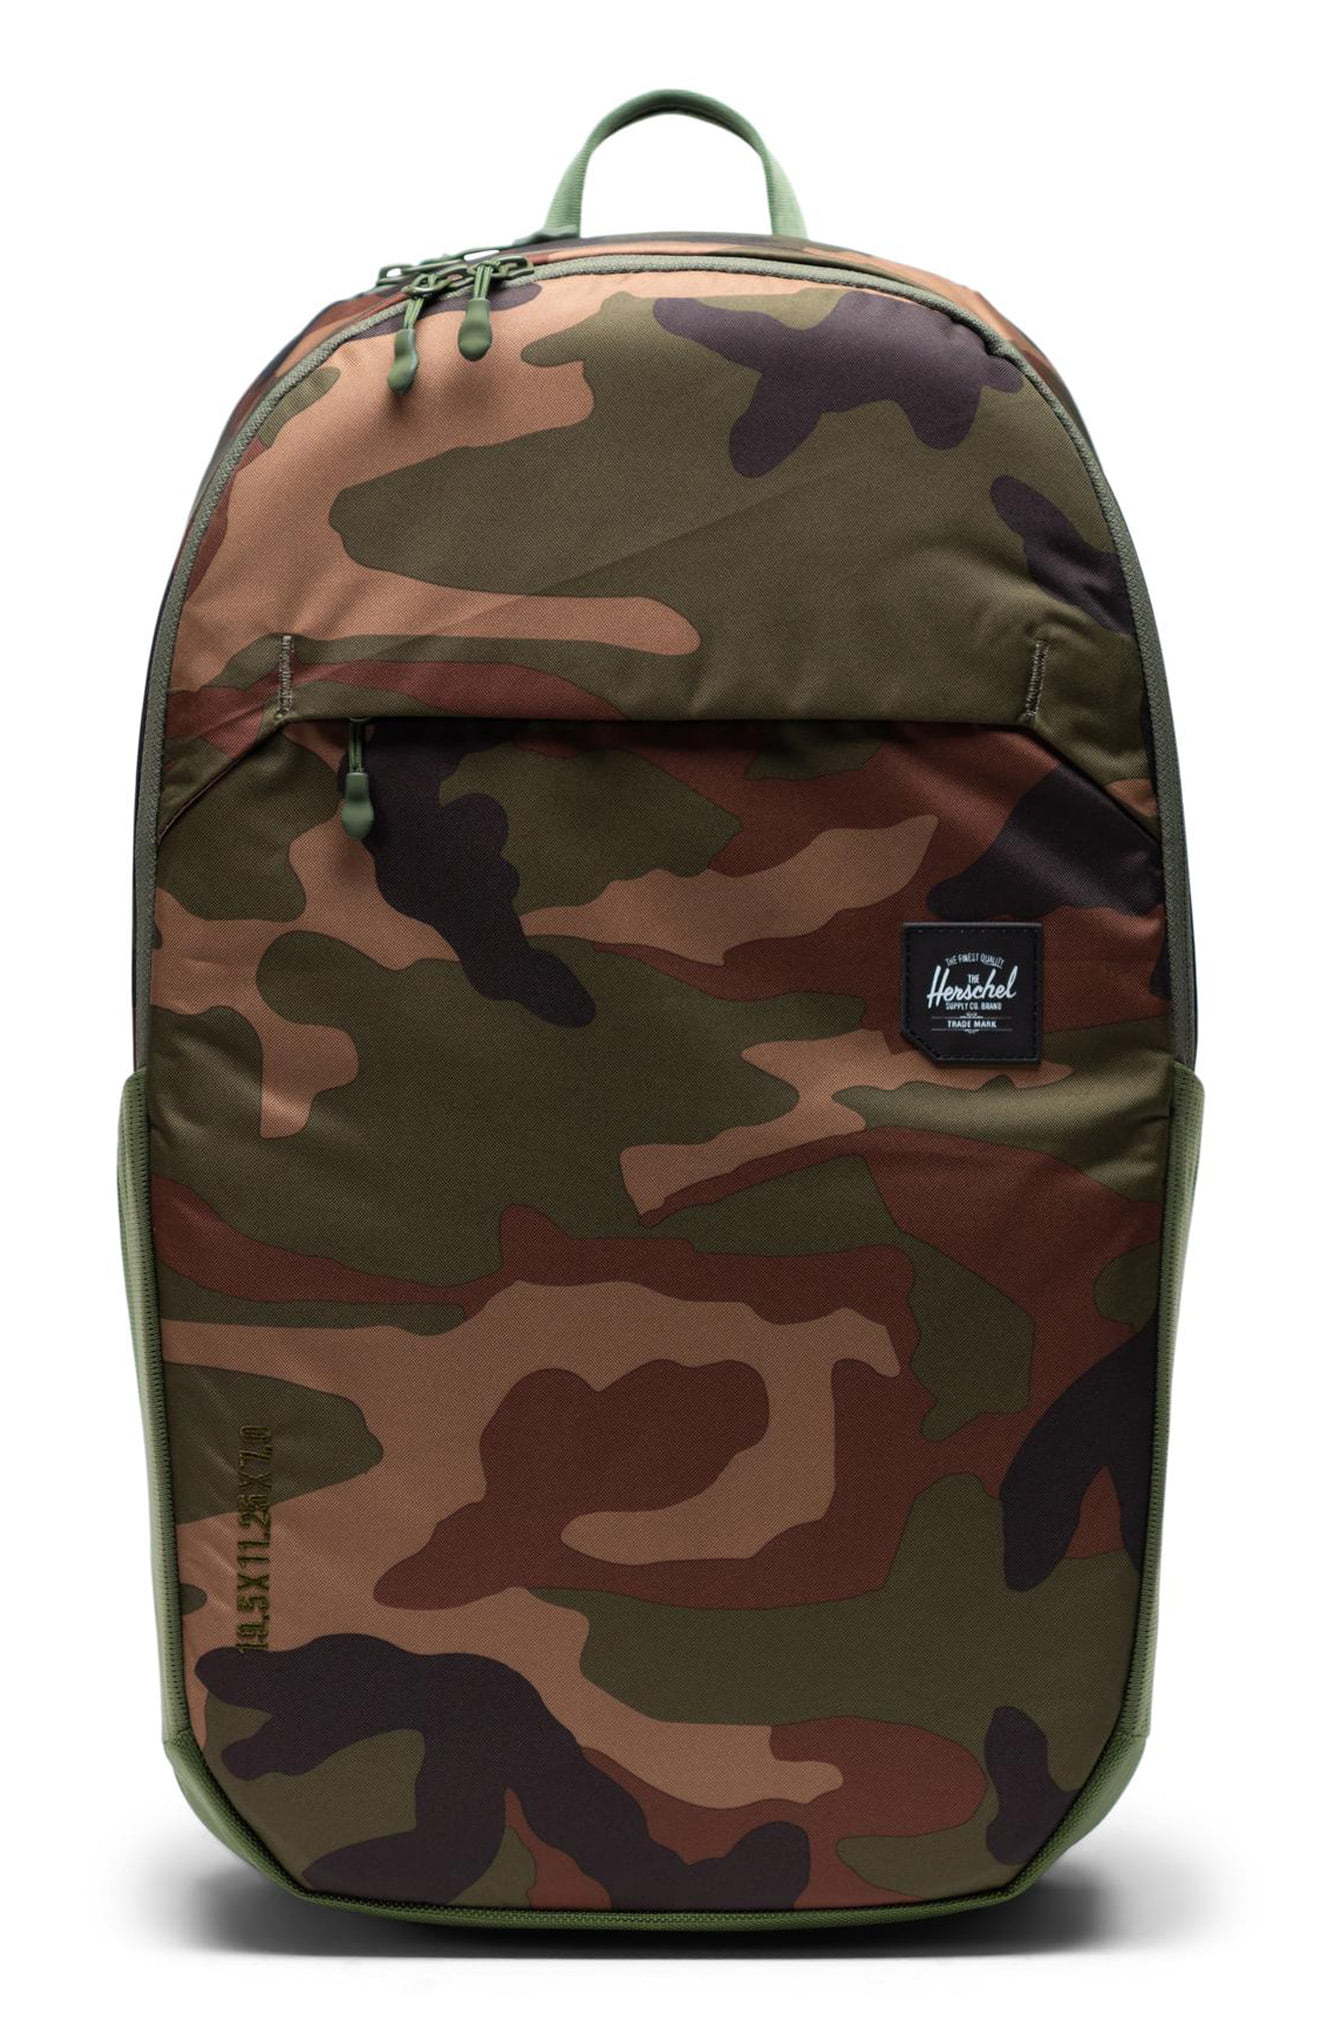 Herschel Supply Co. Mammoth Trail Large Backpack, $120 | Nordstrom ...